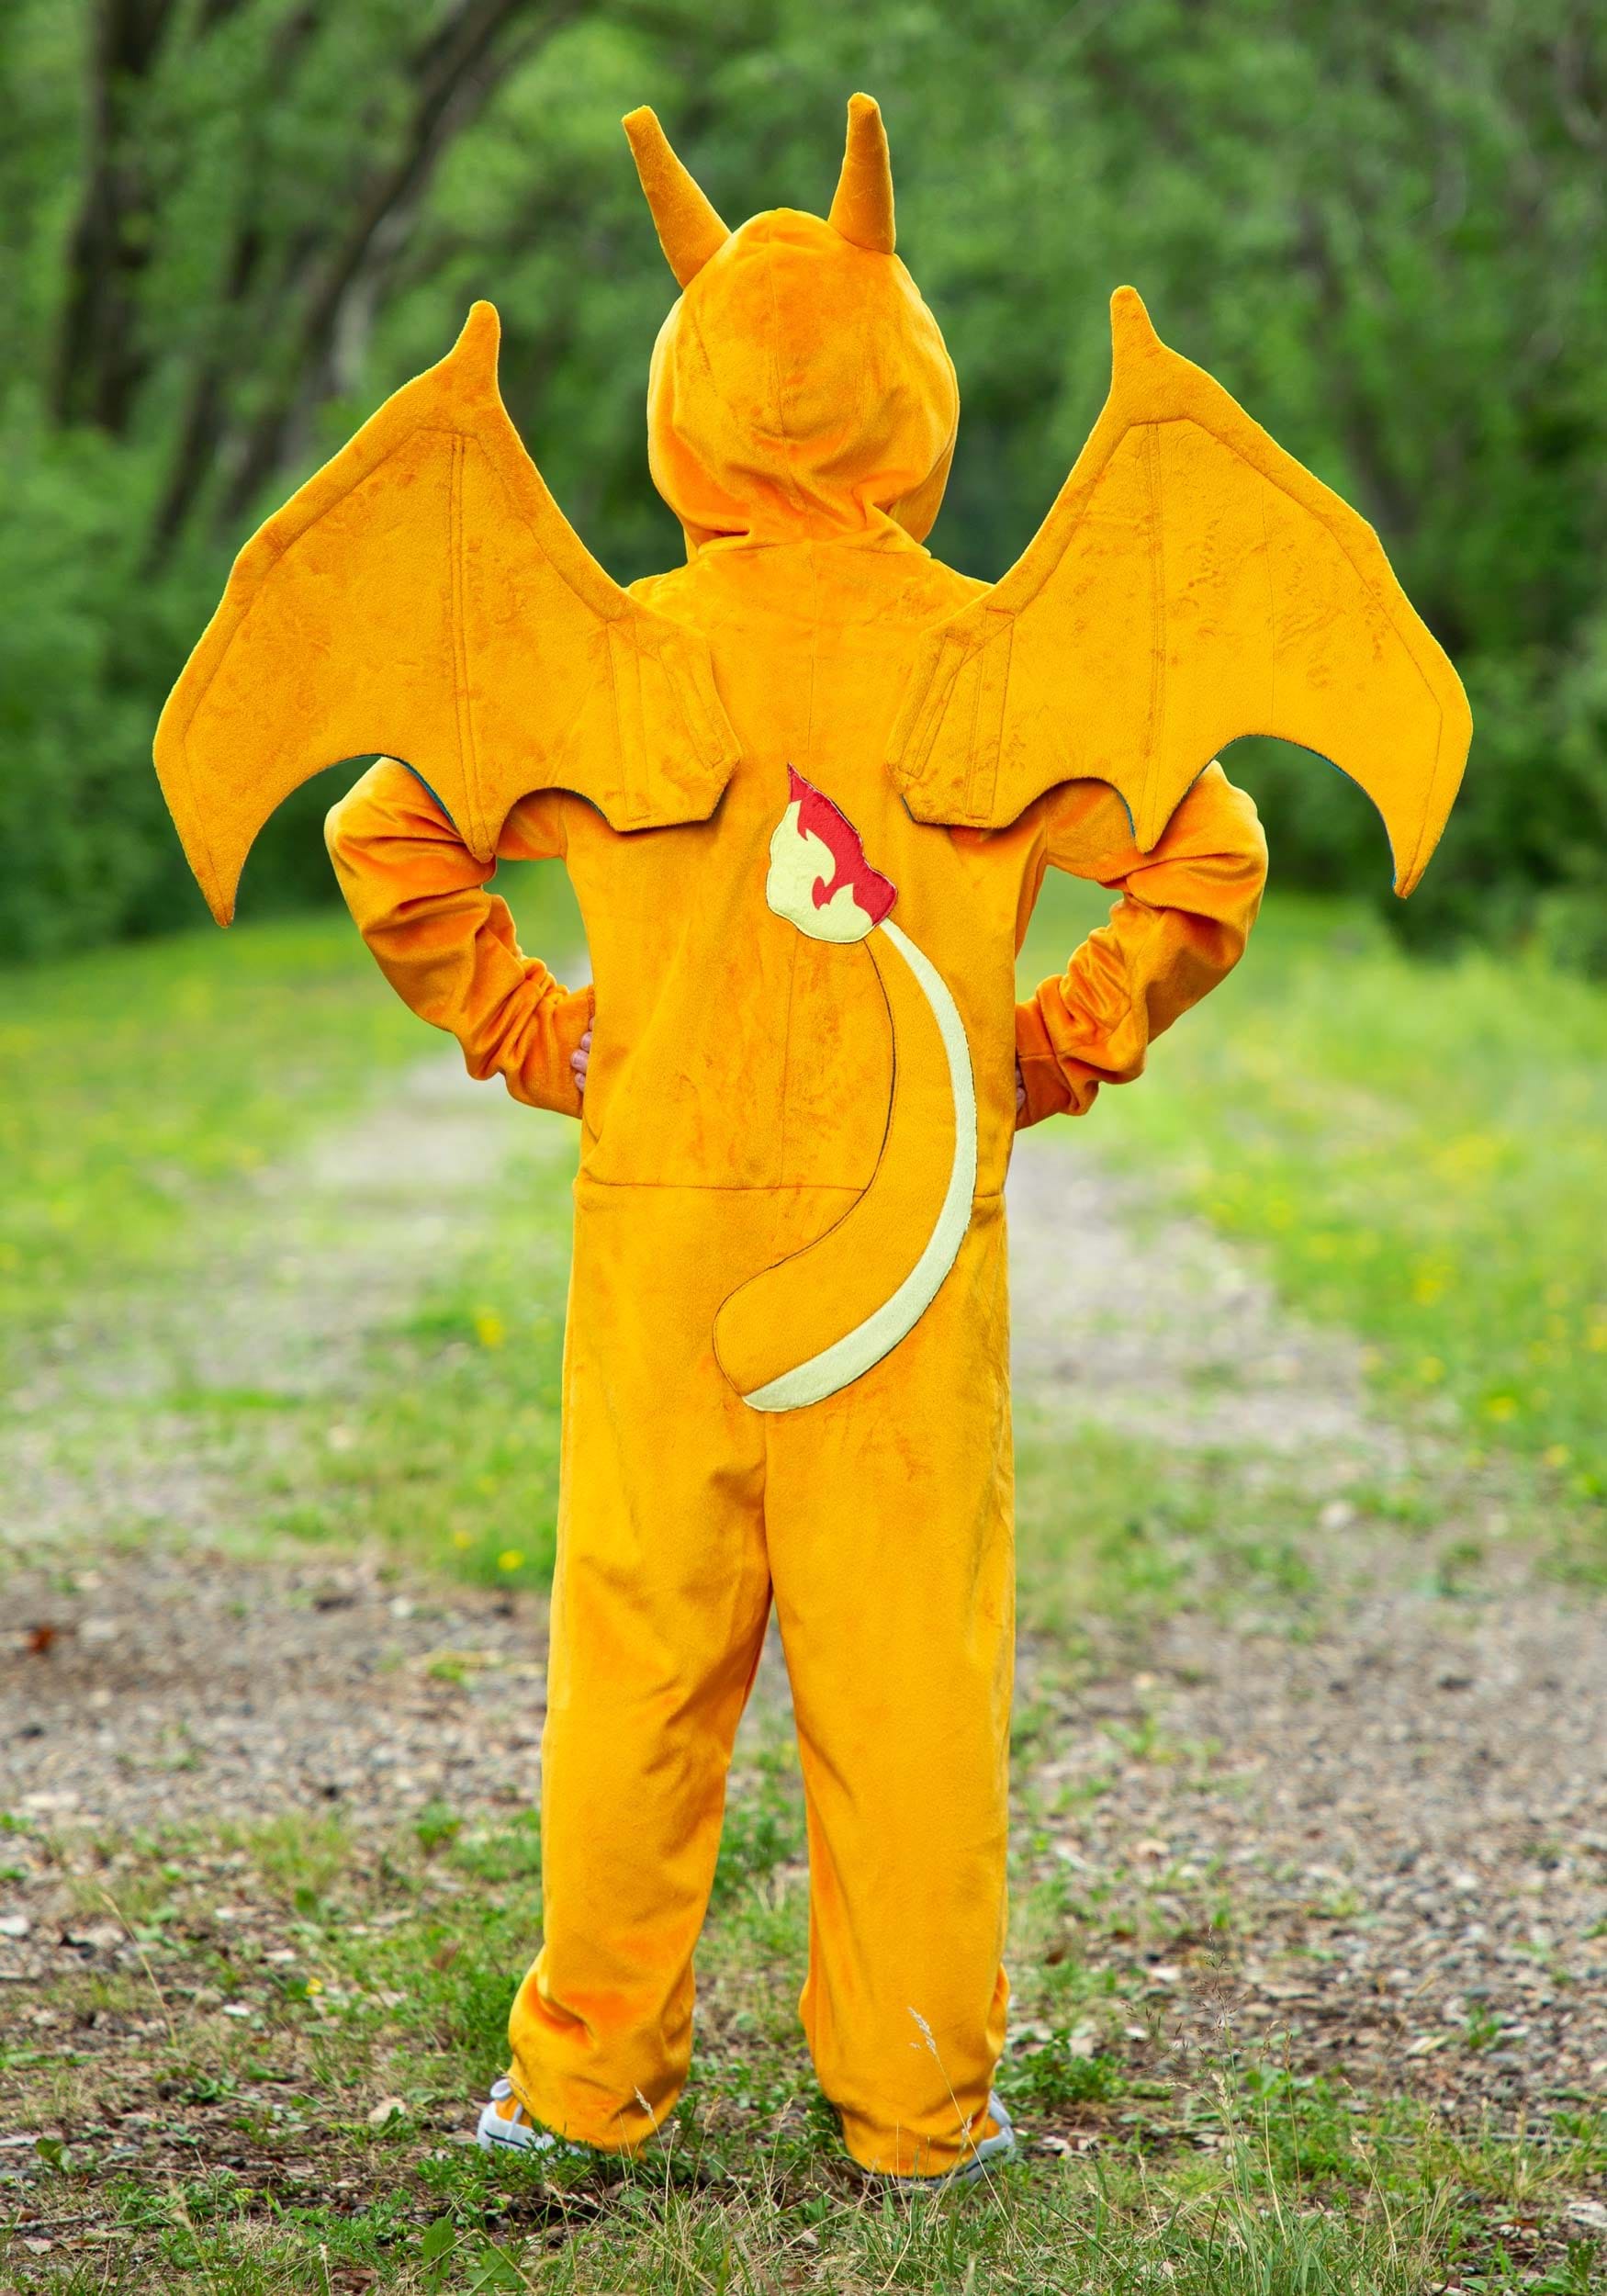  Disguise unisex adults Pikachu Deluxe Adult Sized